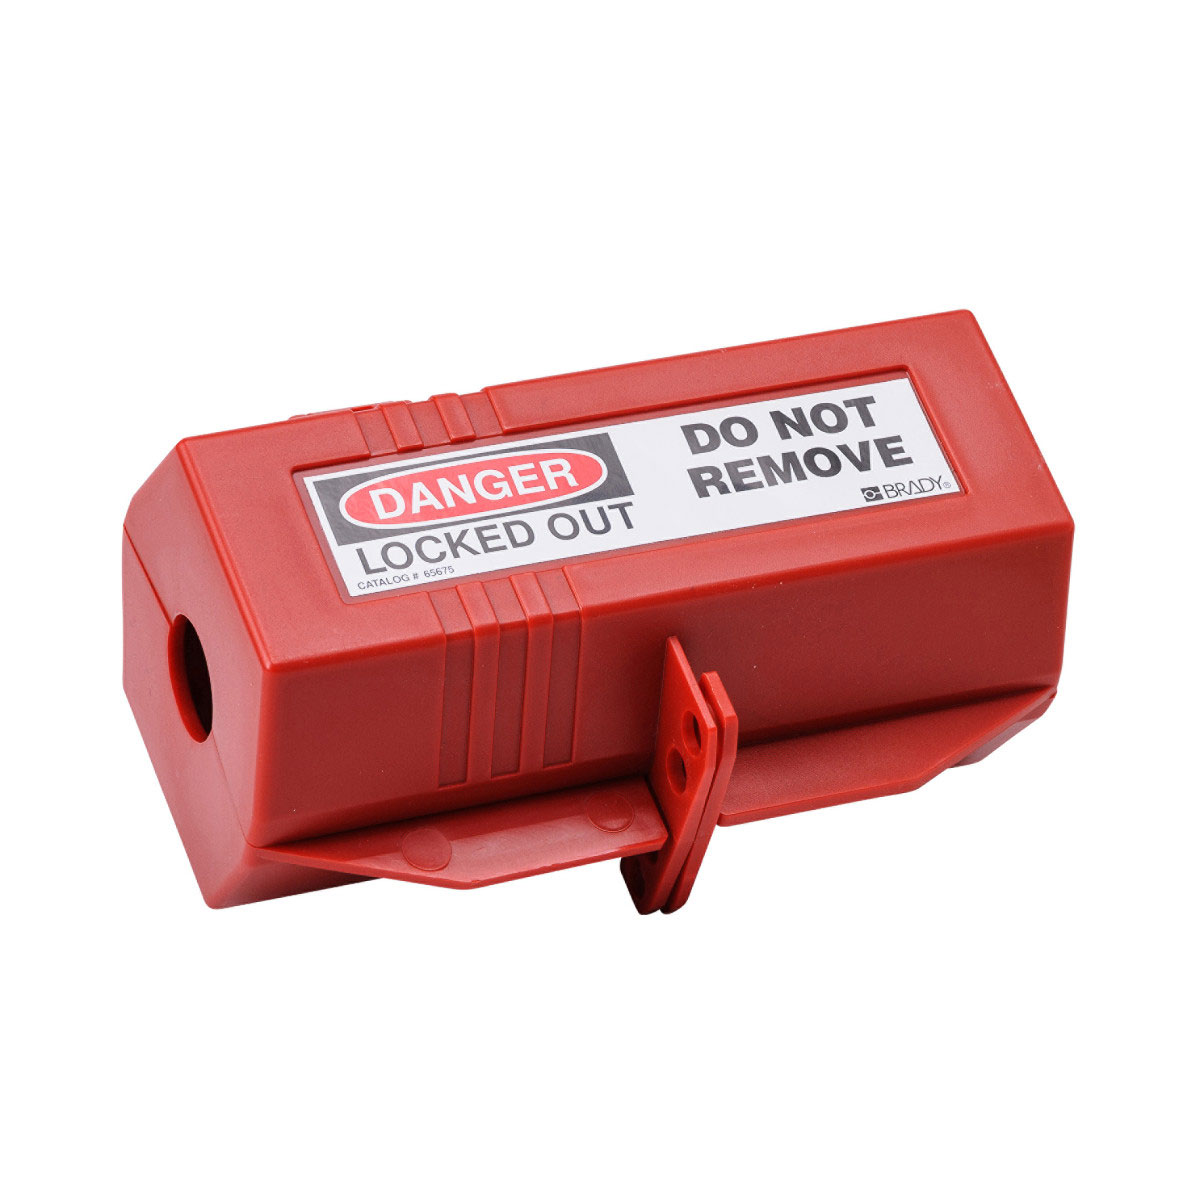 Master Lock Lockout Tagout Device 110 and Electrical Prong Plug Lockout Device 